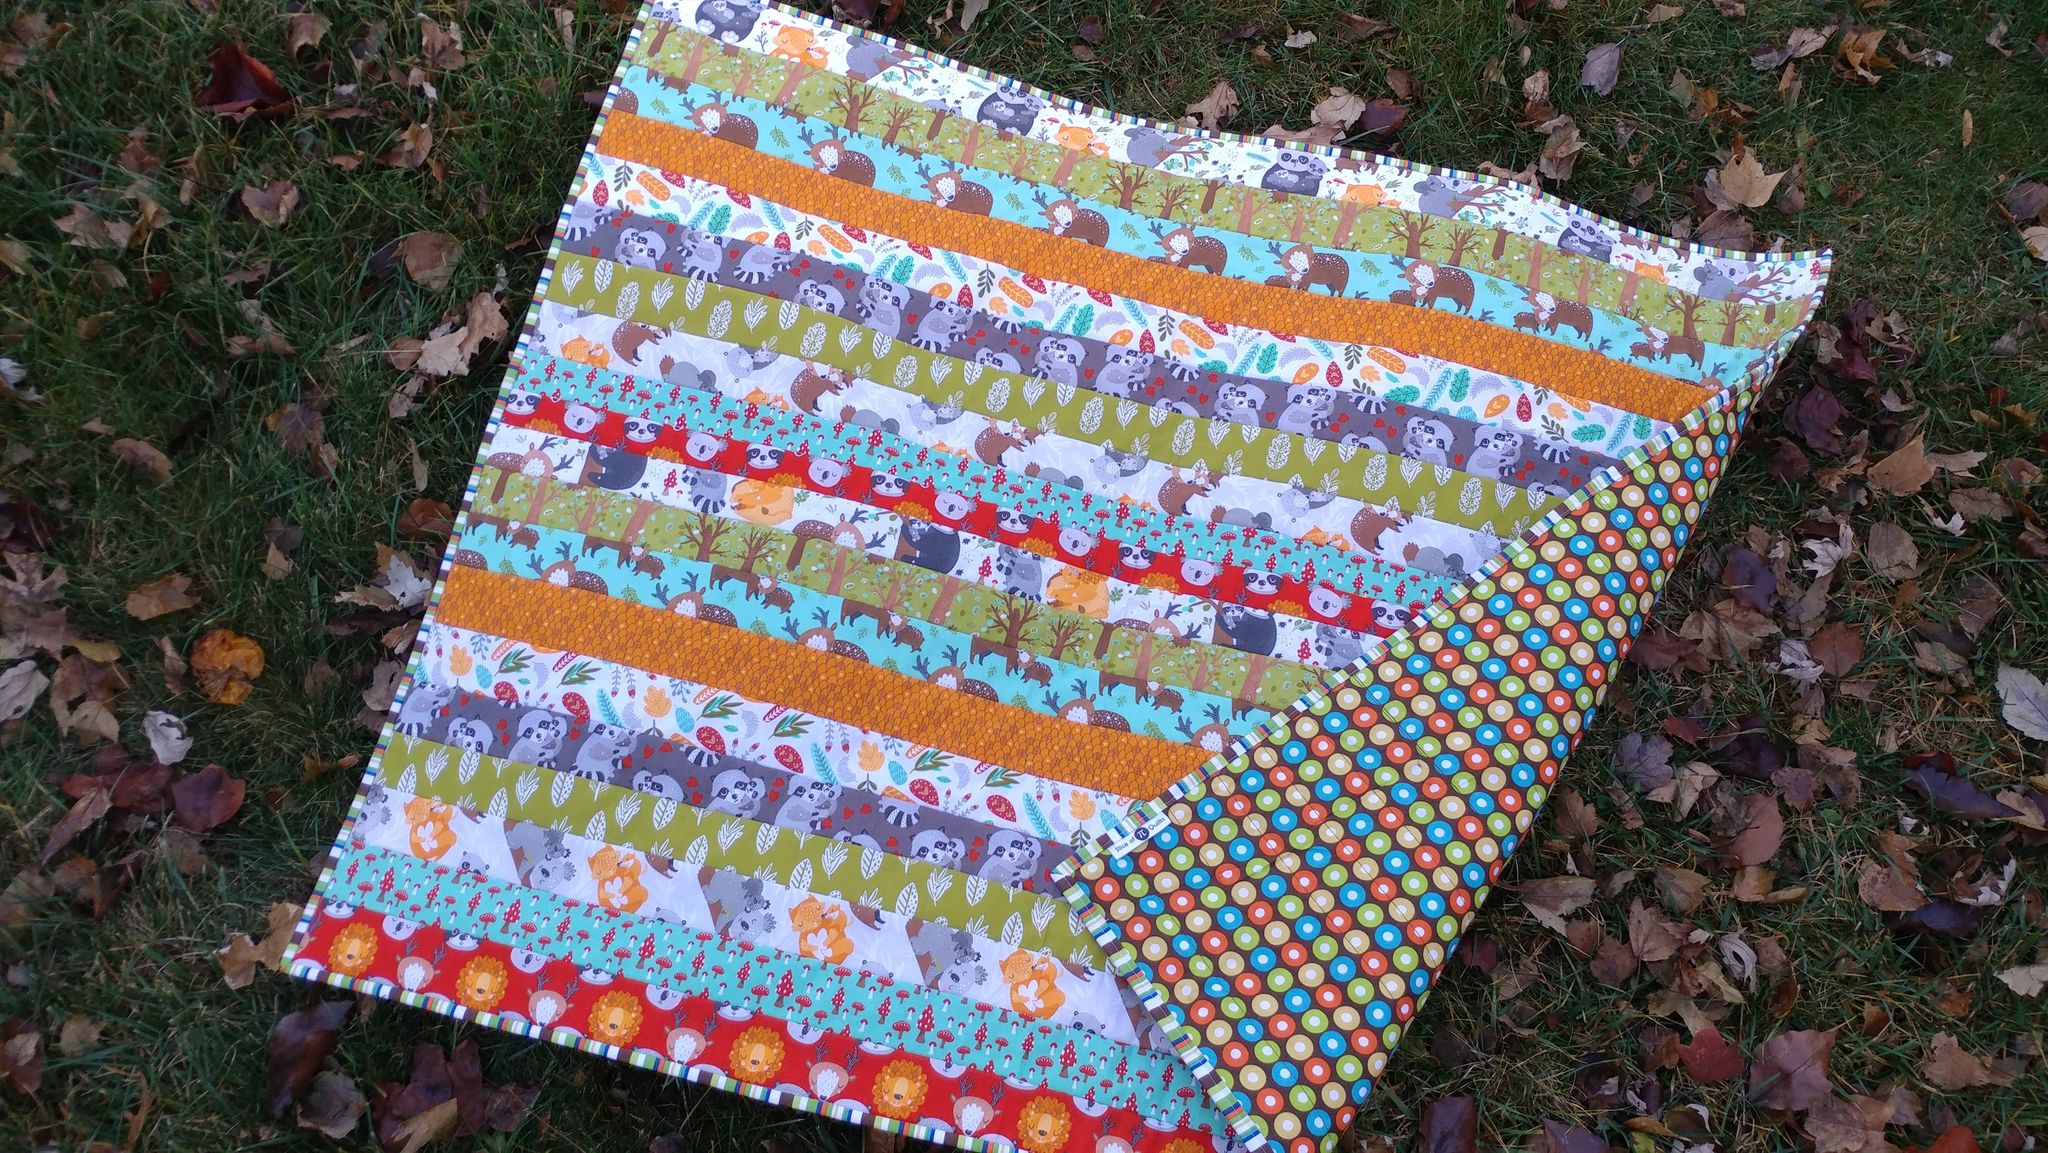 10 Baby Quilt Kits You Can Finish In a Weekend - Quilting Wemple